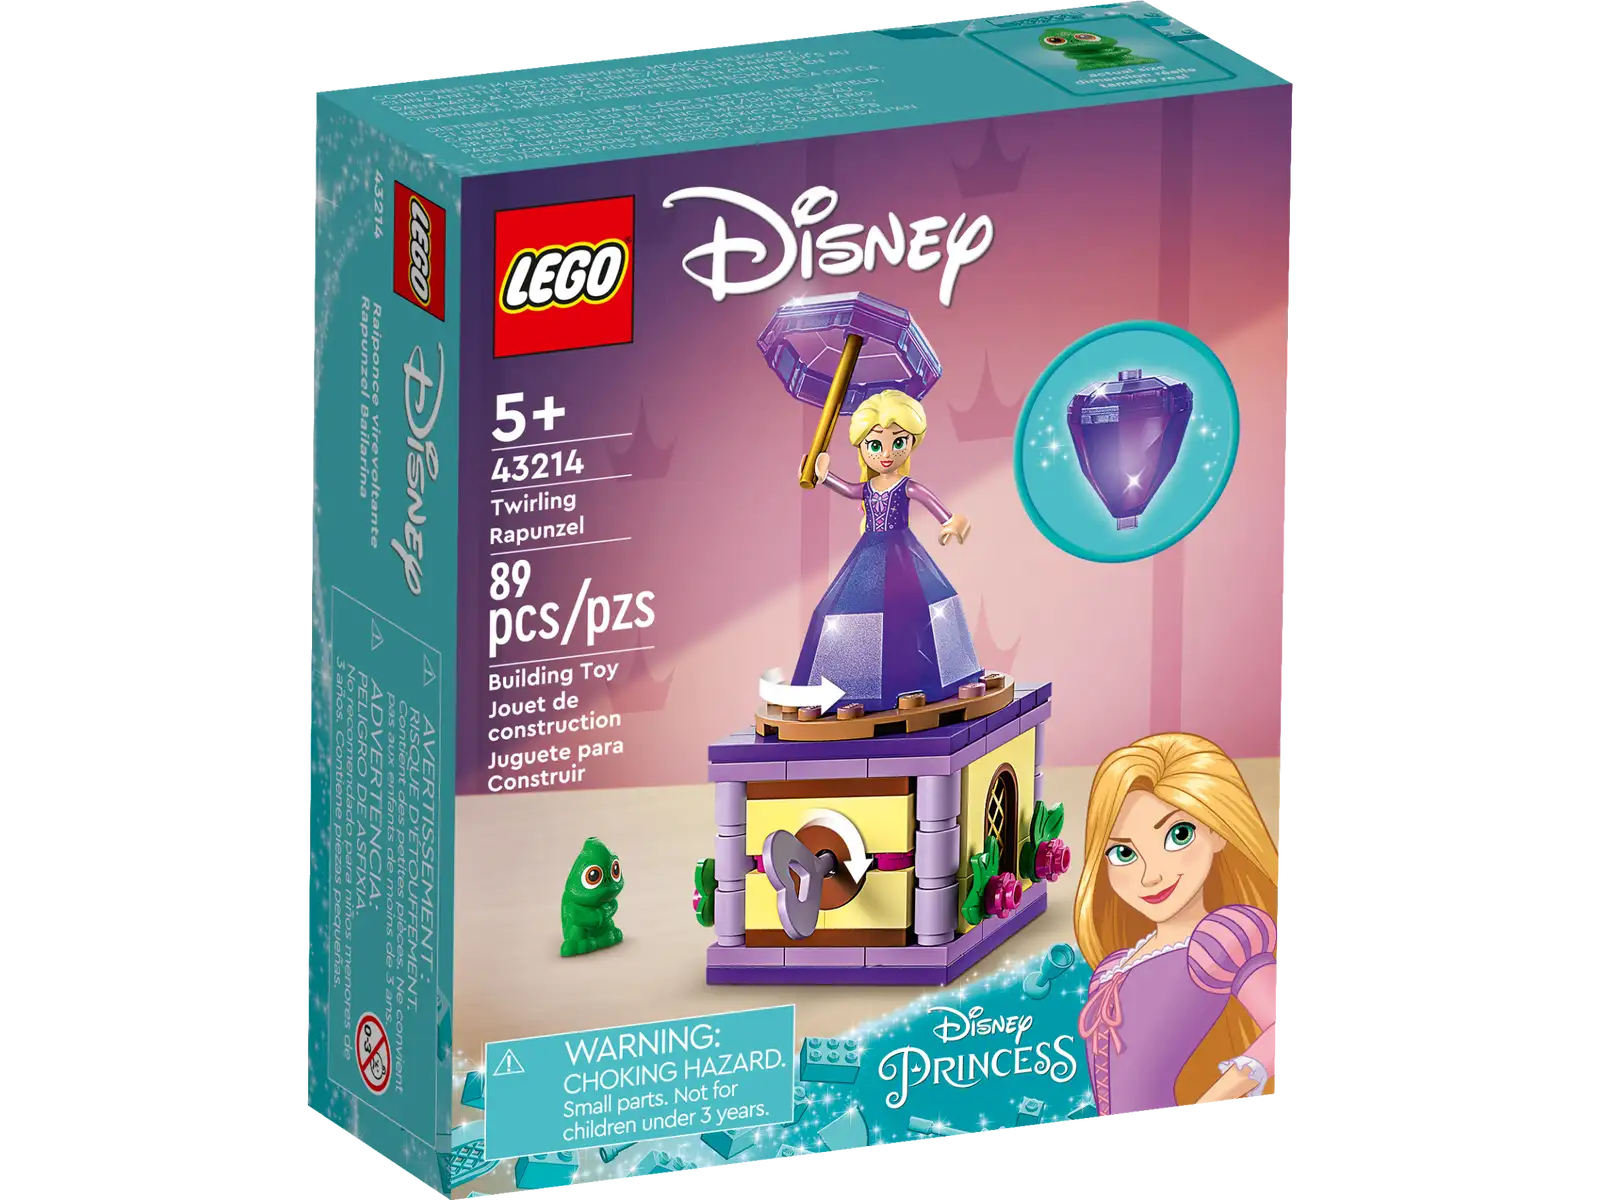 Captivate kids aged 5 and up with this LEGO® ǀ Disney Twirling Rapunzel (43214) set, featuring a buildable stand with decorative details, key and space for Pascal the chameleon LEGO figure, a Rapunzel LEGO mini-doll figure and a ‘diamond’ dress that connects with the umbrella to store the mini-doll. Kids can enjoy an easy and intuitive building adventure with the LEGO Builder app, which lets them zoom in and rotate models in 3D, save sets and track their progress. Learning and fun Disney’s Rapunzel fans gain meaningful skills while playing with this set. The build helps grow children’s confidence, while sparking their imagination and creativity as they play out movie-based scenes or invent their own. It can be played with independently or added to other LEGO ǀ Disney sets (sold separately). Well-known characters This fun set gets kids playing quickly with a Disney’s Rapunzel LEGO mini-doll figure and Pascal LEGO chameleon figure and makes a creative ‘just because’ gift for kids any time. Imaginative play – Give a Disney’s Rapunzel fan an unexpected treat with this LEGO® ǀ Disney Twirling Rapunzel (43214) Building Toy Set. The fun starts with building and doesn’t stop What’s inside? – This 89-piece set has a buildable stand with decorative details and a key, a small space for a LEGO® figure and a transforming ‘diamond’ dress that stores a LEGO mini-doll figure Well-known characters – Featuring Disney’s Rapunzel and Pascal the chameleon LEGO® figures, this set can be combined with other Disney Princess sets (sold separately) or used for open play on its own Inventive gift for ages 5+ – Kids will love this set full of imaginative possibilities, which makes a fun birthday gift or ‘just because’ treat Play on the go – With the box (including mini-doll) measuring over 4.5 in. (11 cm) high, 2.5 in. (6 cm) wide and 2 in. (5 cm) deep, this set is made for kids to build and play with anywhere A new way to build – Let the LEGO® Builder app guide kids on an intuitive building adventure. They can save sets, track progress and zoom in and rotate models in 3D while they build Collectible fun – The LEGO® ǀ Disney Diamond Dress Assortment offers kids and fans a range of sets, with 5 different princesses and their ‘diamond’ dresses spread across the collection Building life skills – With a detailed mini-doll figure and courtyard build, this Disney’s Rapunzel buildable set encourages open creative play that helps build important life skills through fun Uncompromising quality – Ever since 1958, LEGO® components have met stringent industry standards to ensure they connect consistently Safety first – LEGO® components are dropped, heated, crushed, twisted and analyzed to make sure they meet rigorous global safety standards